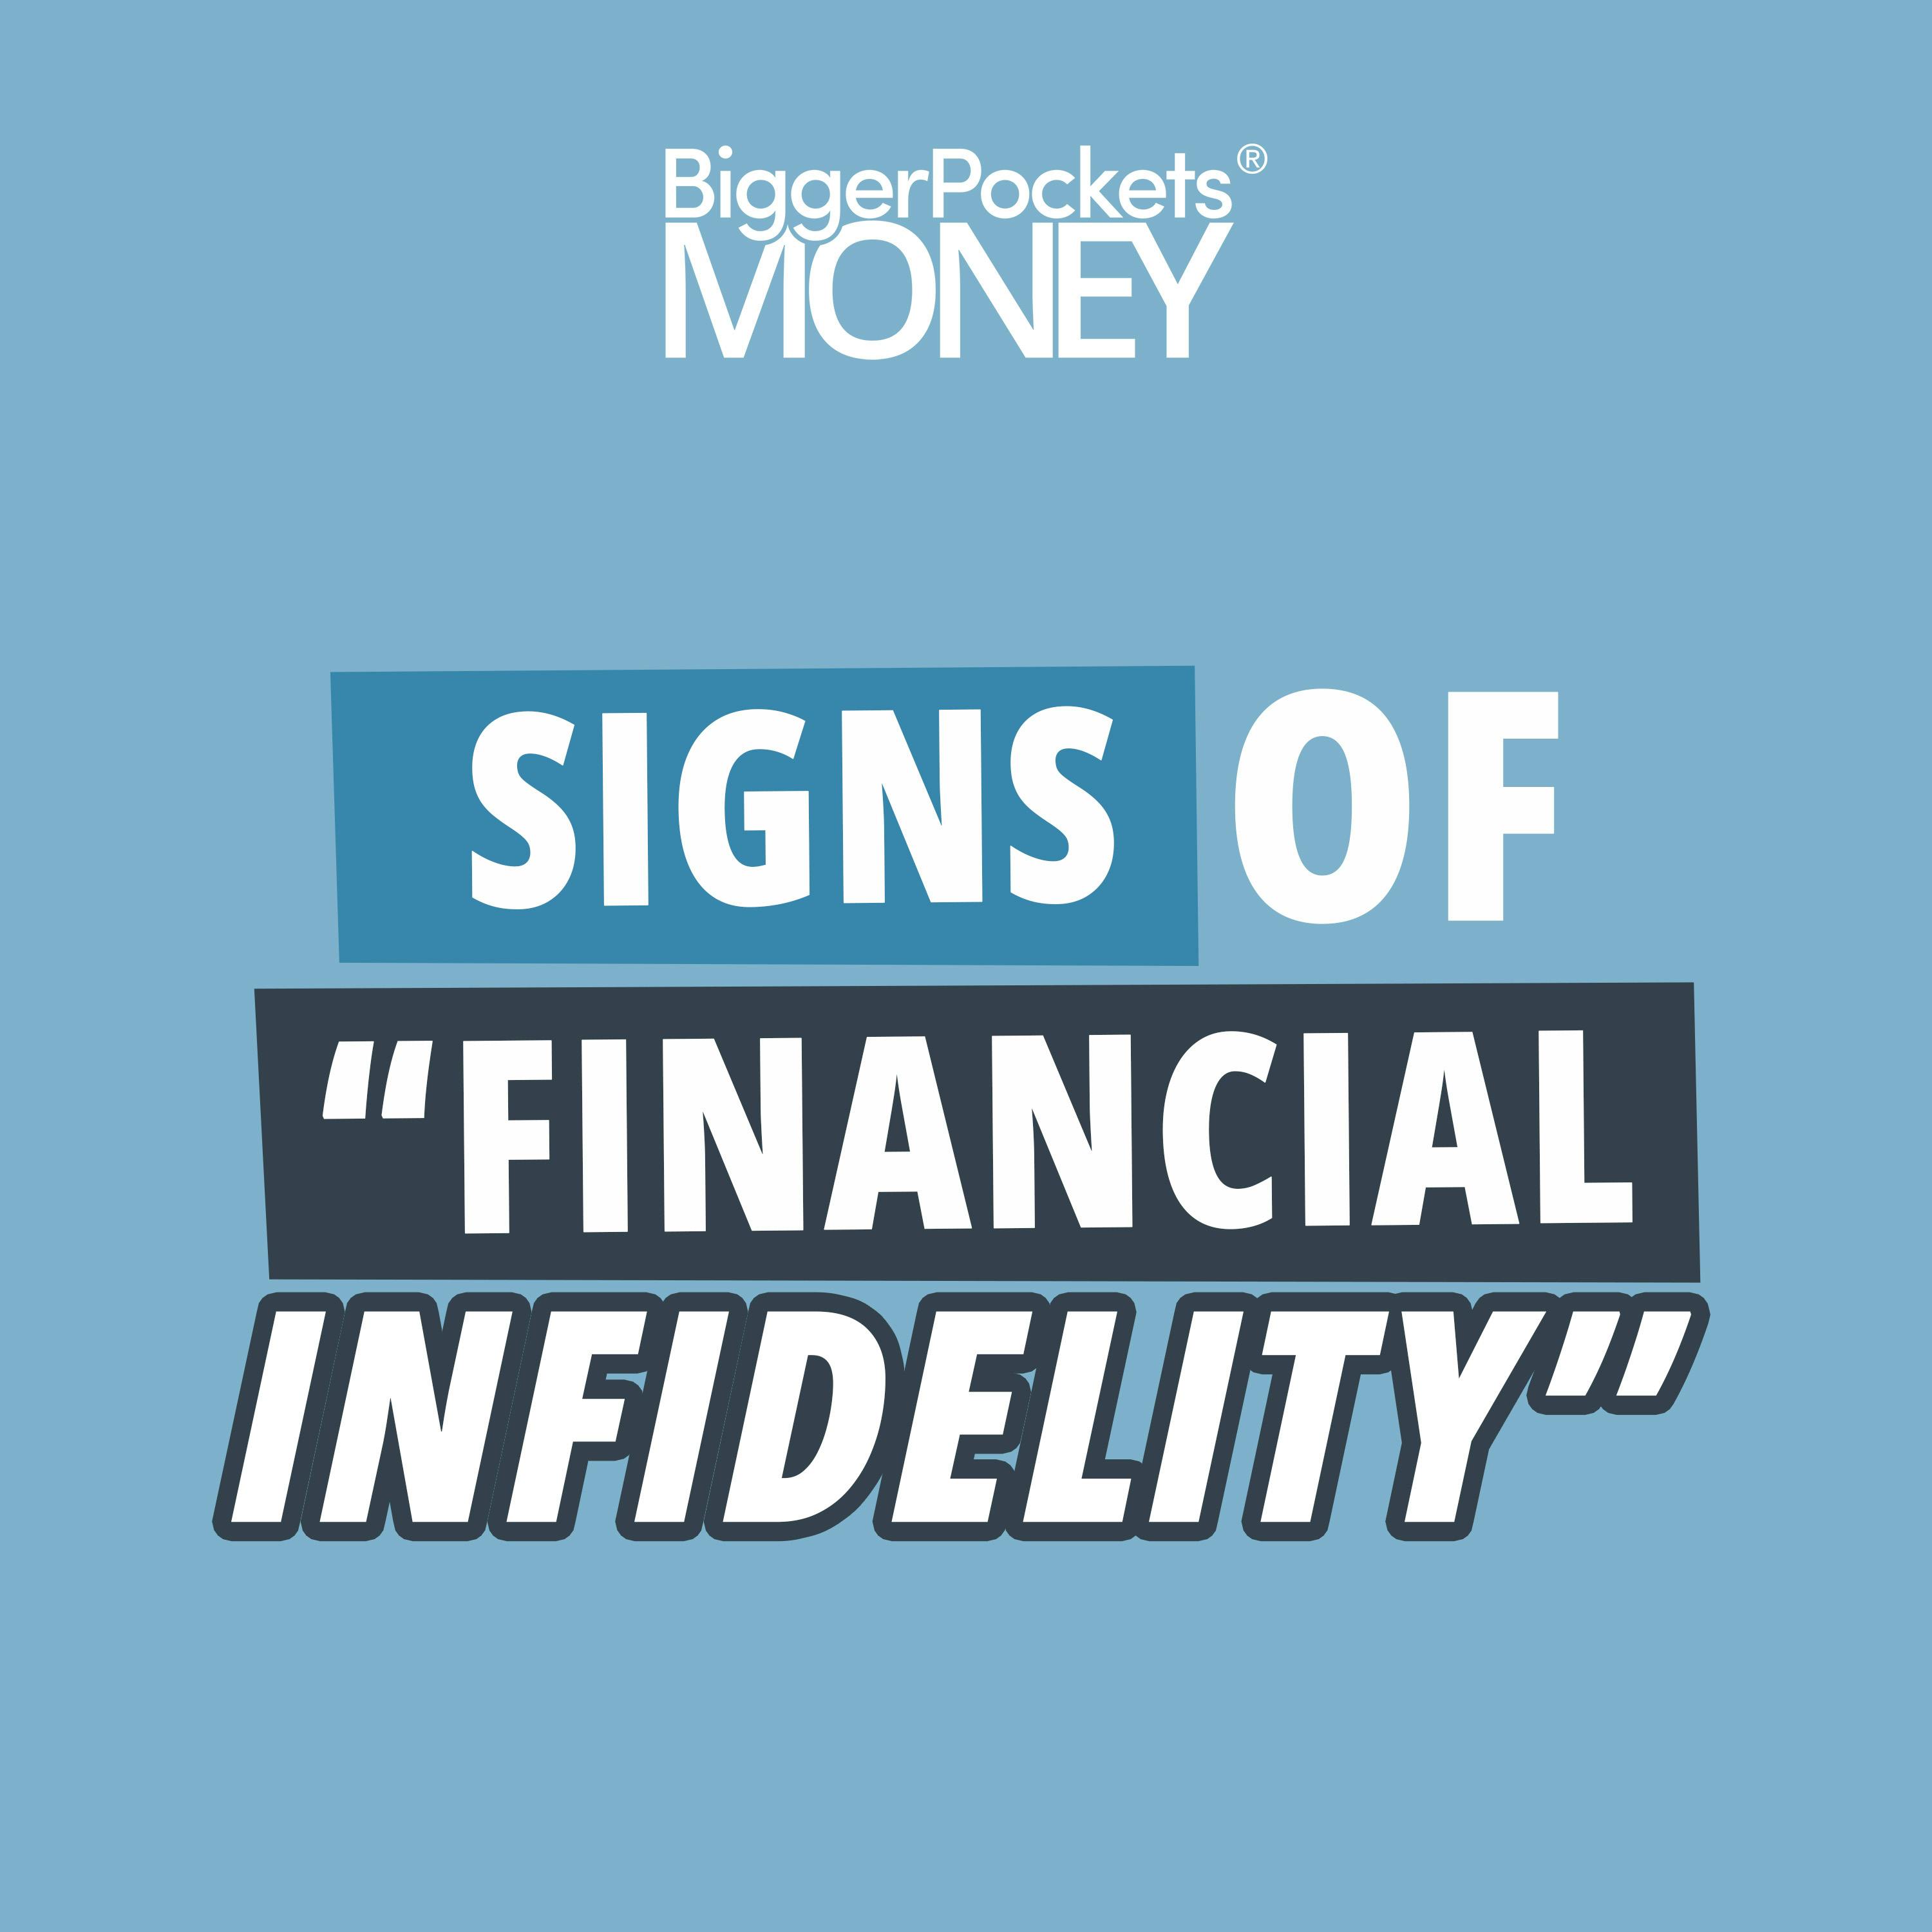 439: Watch Out for These Financial Infidelity “Red Flags” in Your Marriage